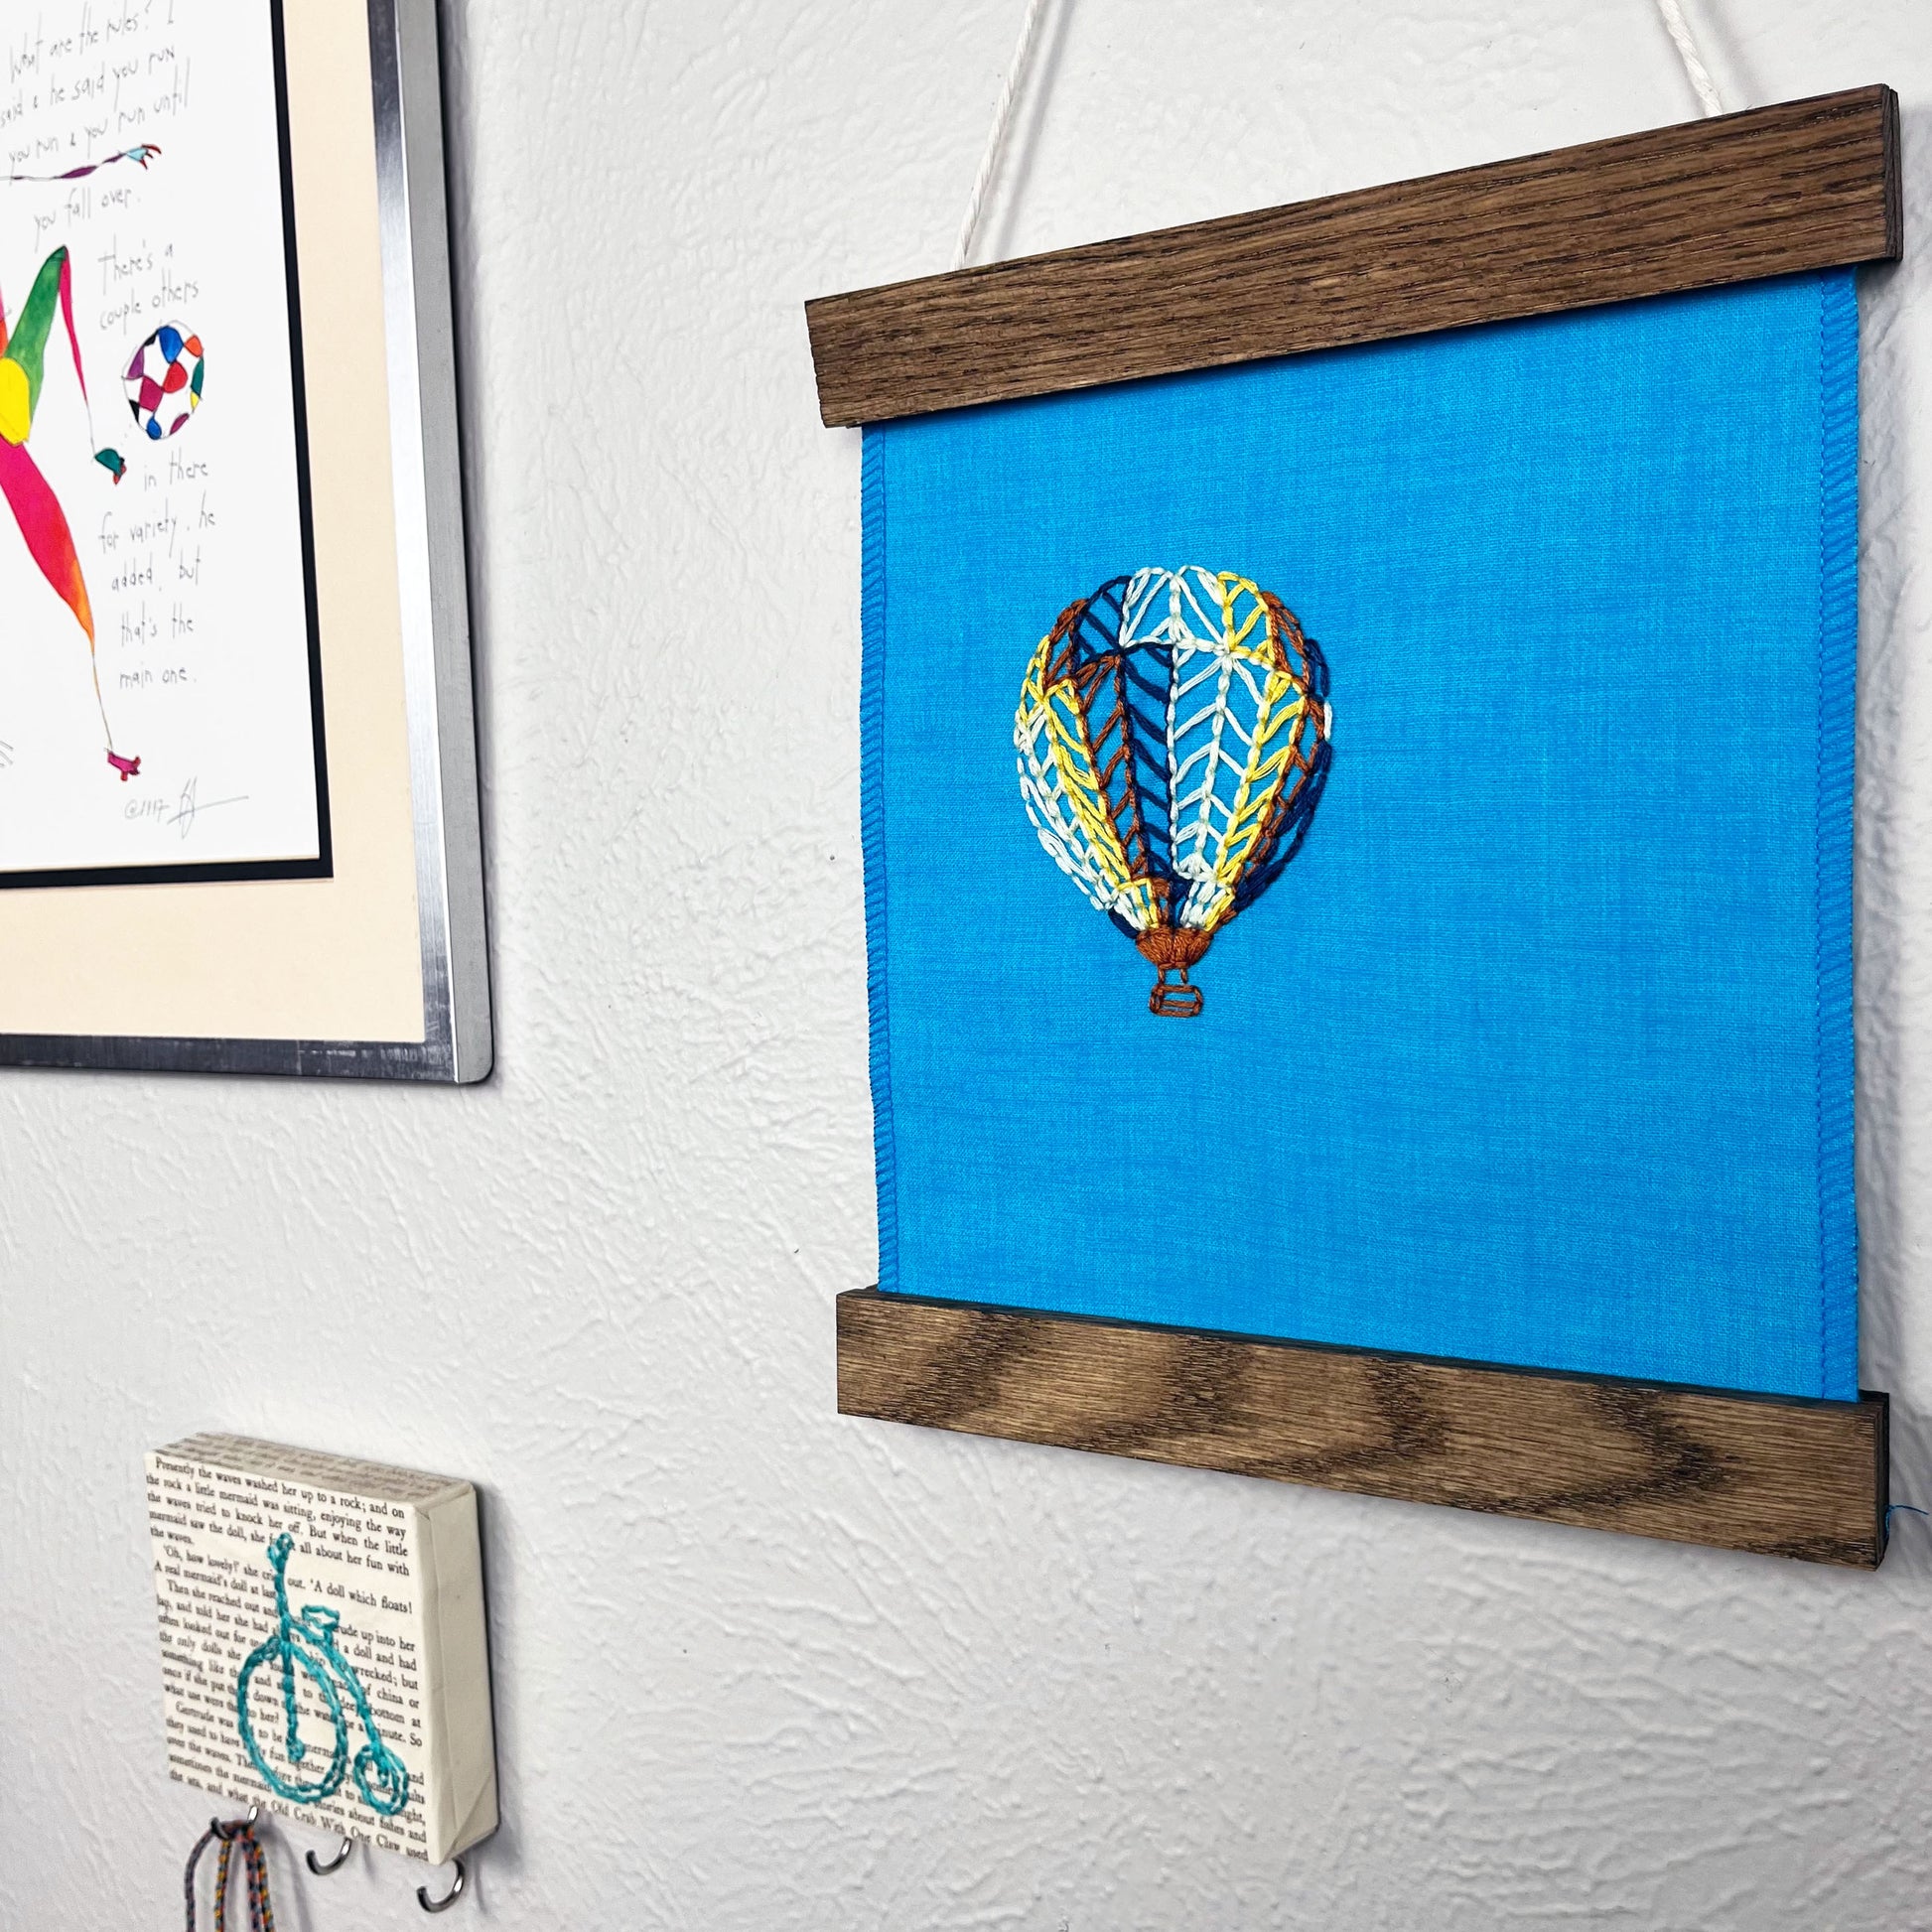 a bright blue fabric wall hanging in a magnetic wood frame, with a hot air balloon stitched on it off center, in dark blue, light blue, light green, yellow and rust colored thread, hanging on a wall near other colorful artwork